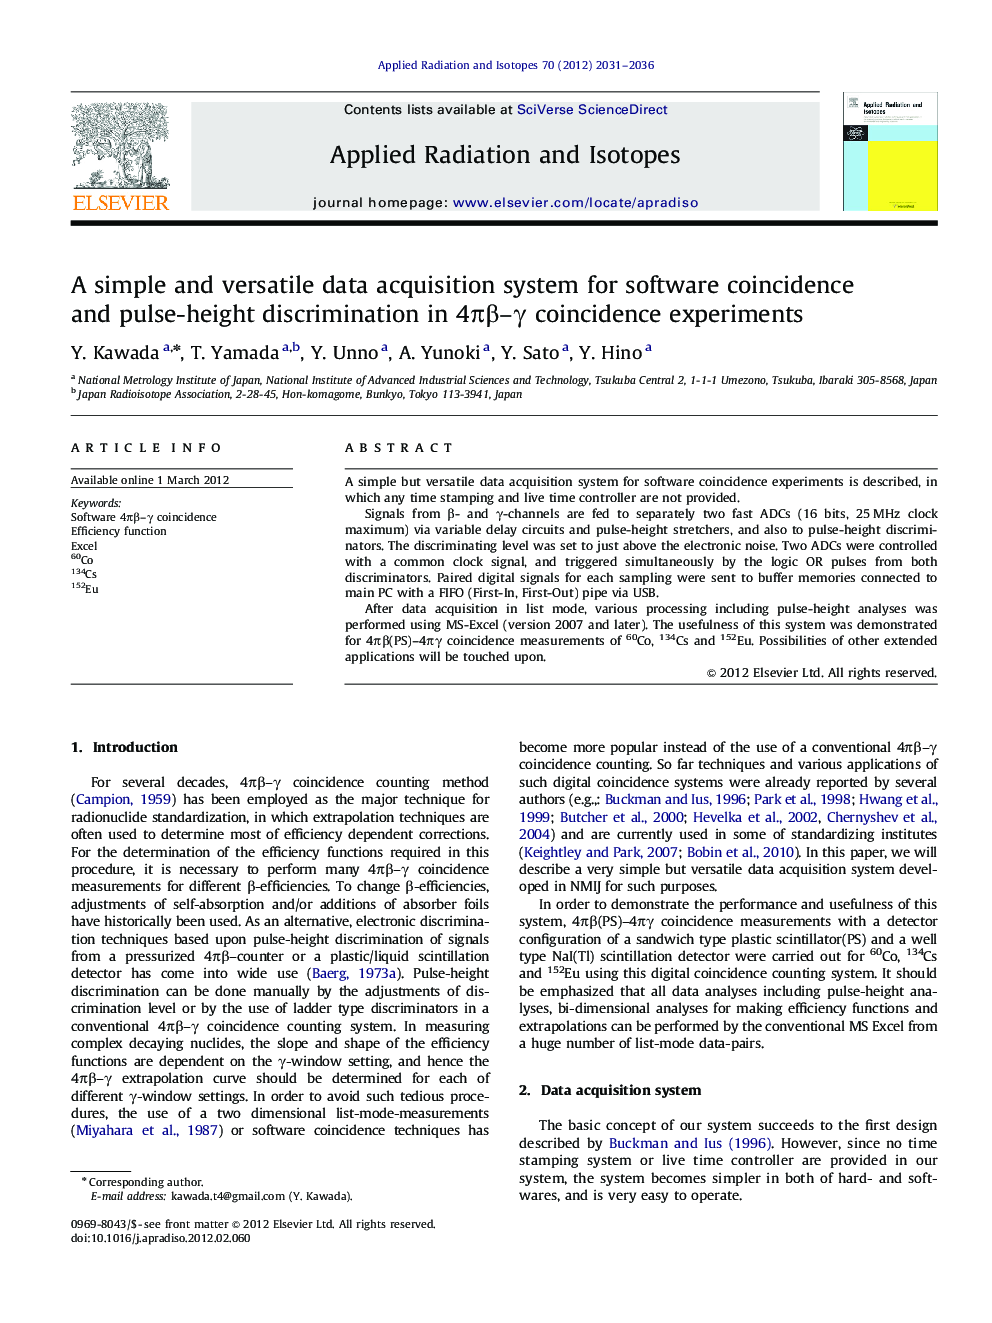 A simple and versatile data acquisition system for software coincidence and pulse-height discrimination in 4ÏÎ²-Î³ coincidence experiments